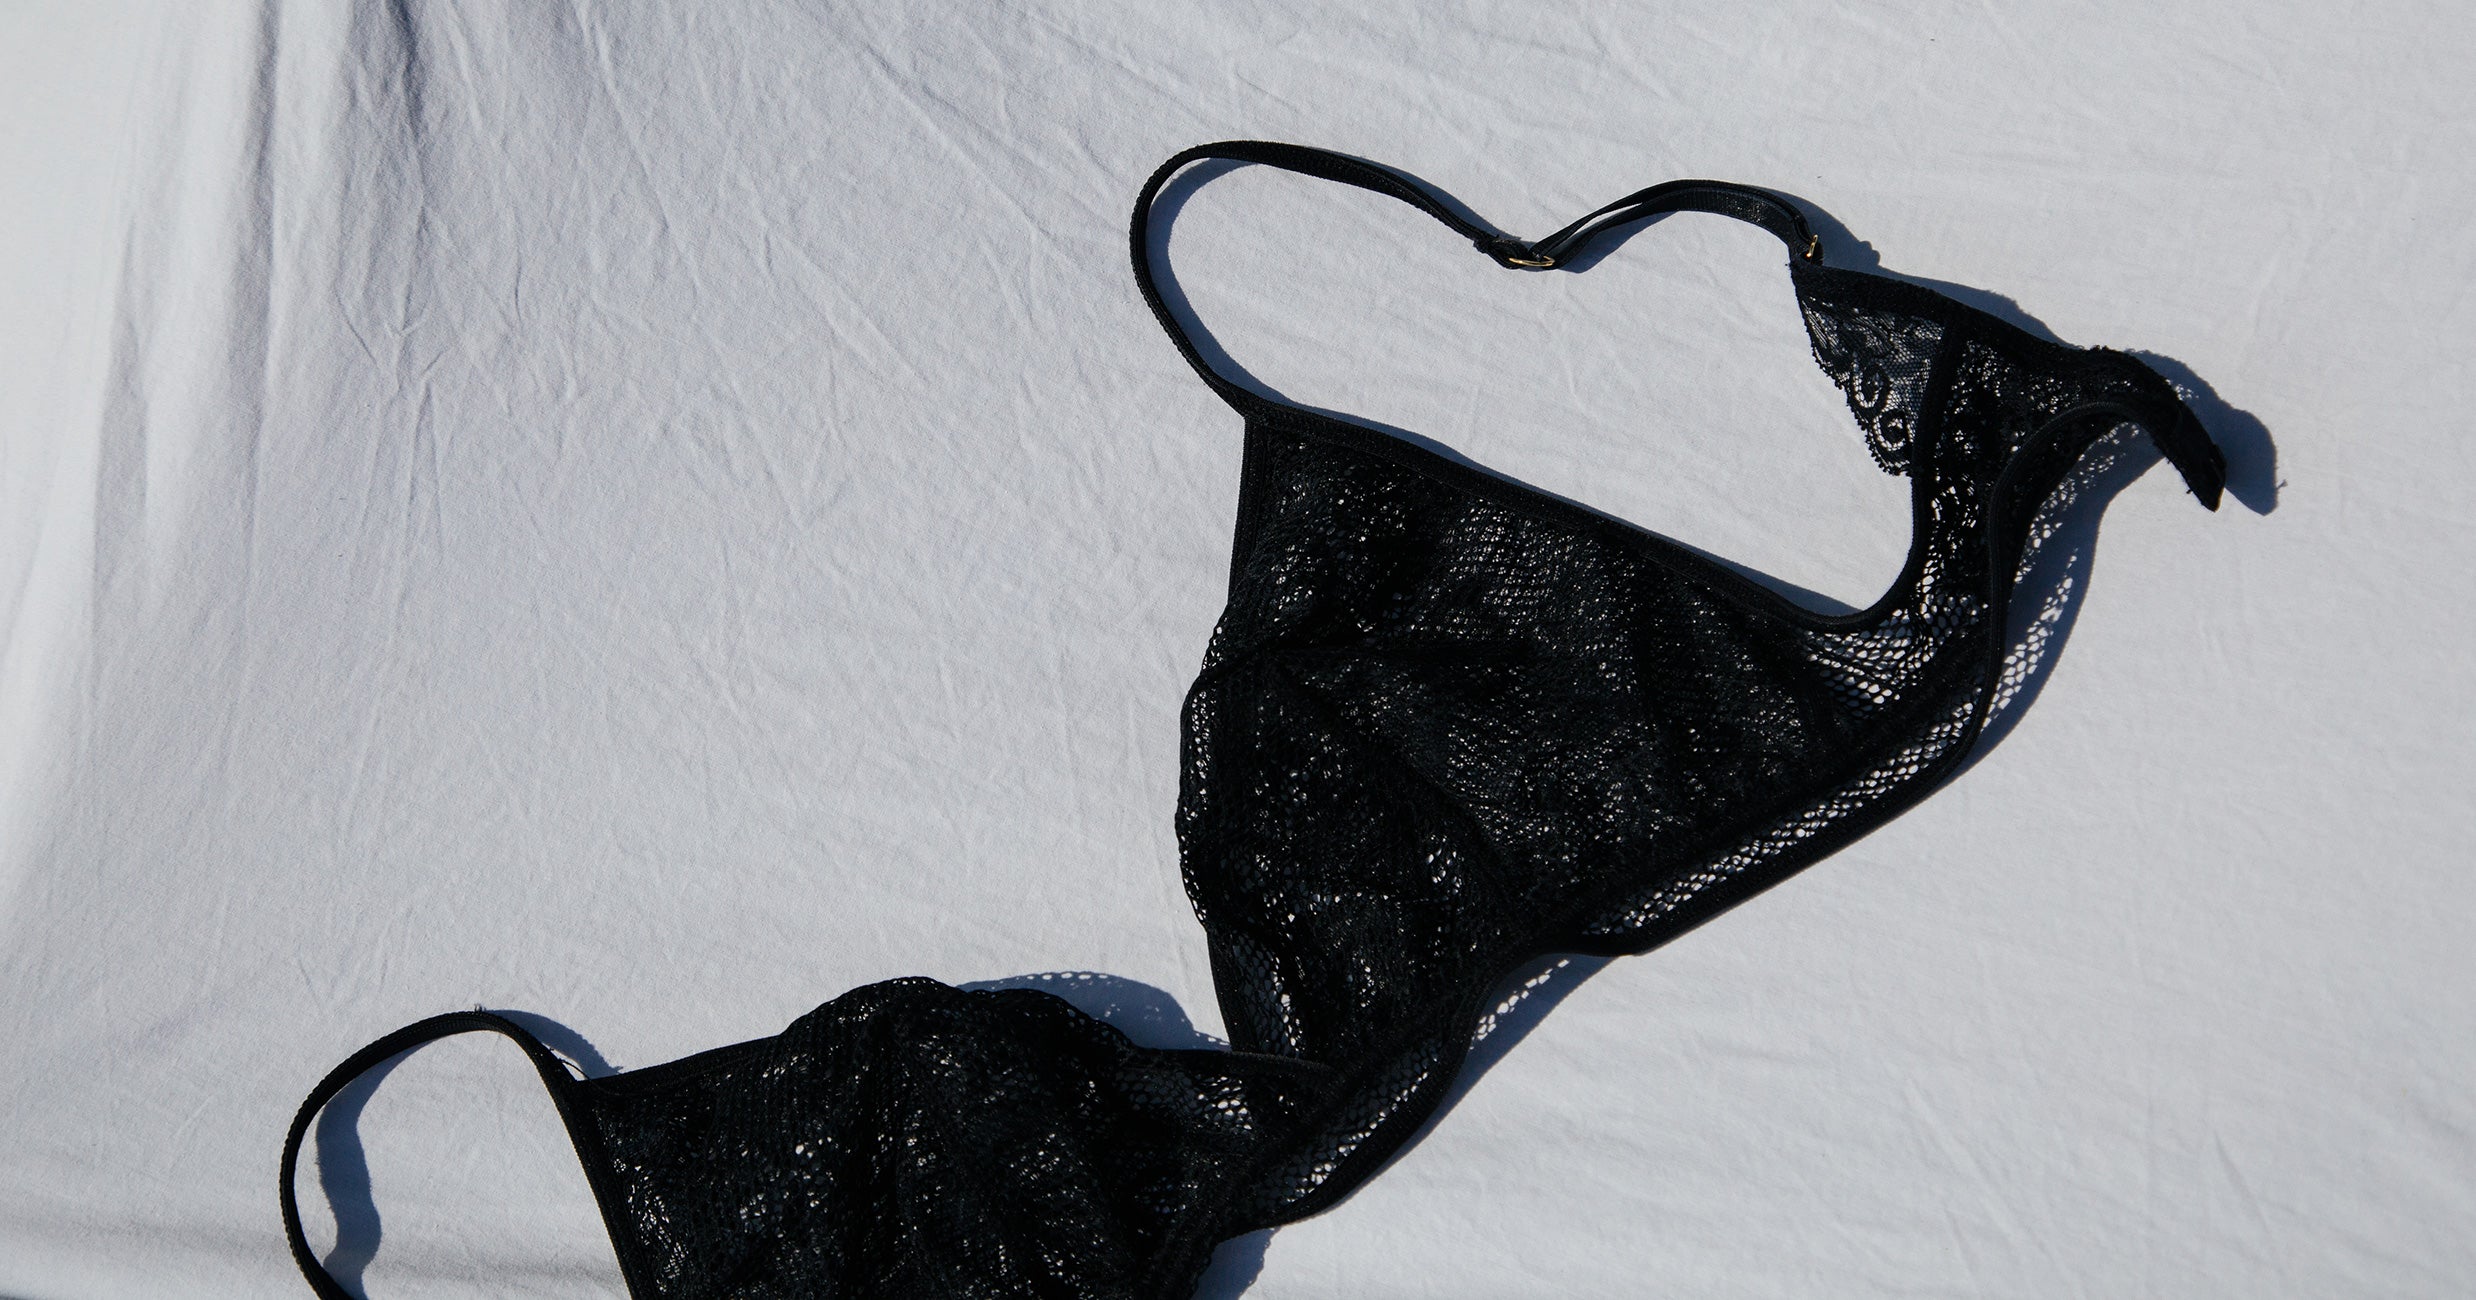 Panty Power: How Pretty Underwear Can Boost Body Image